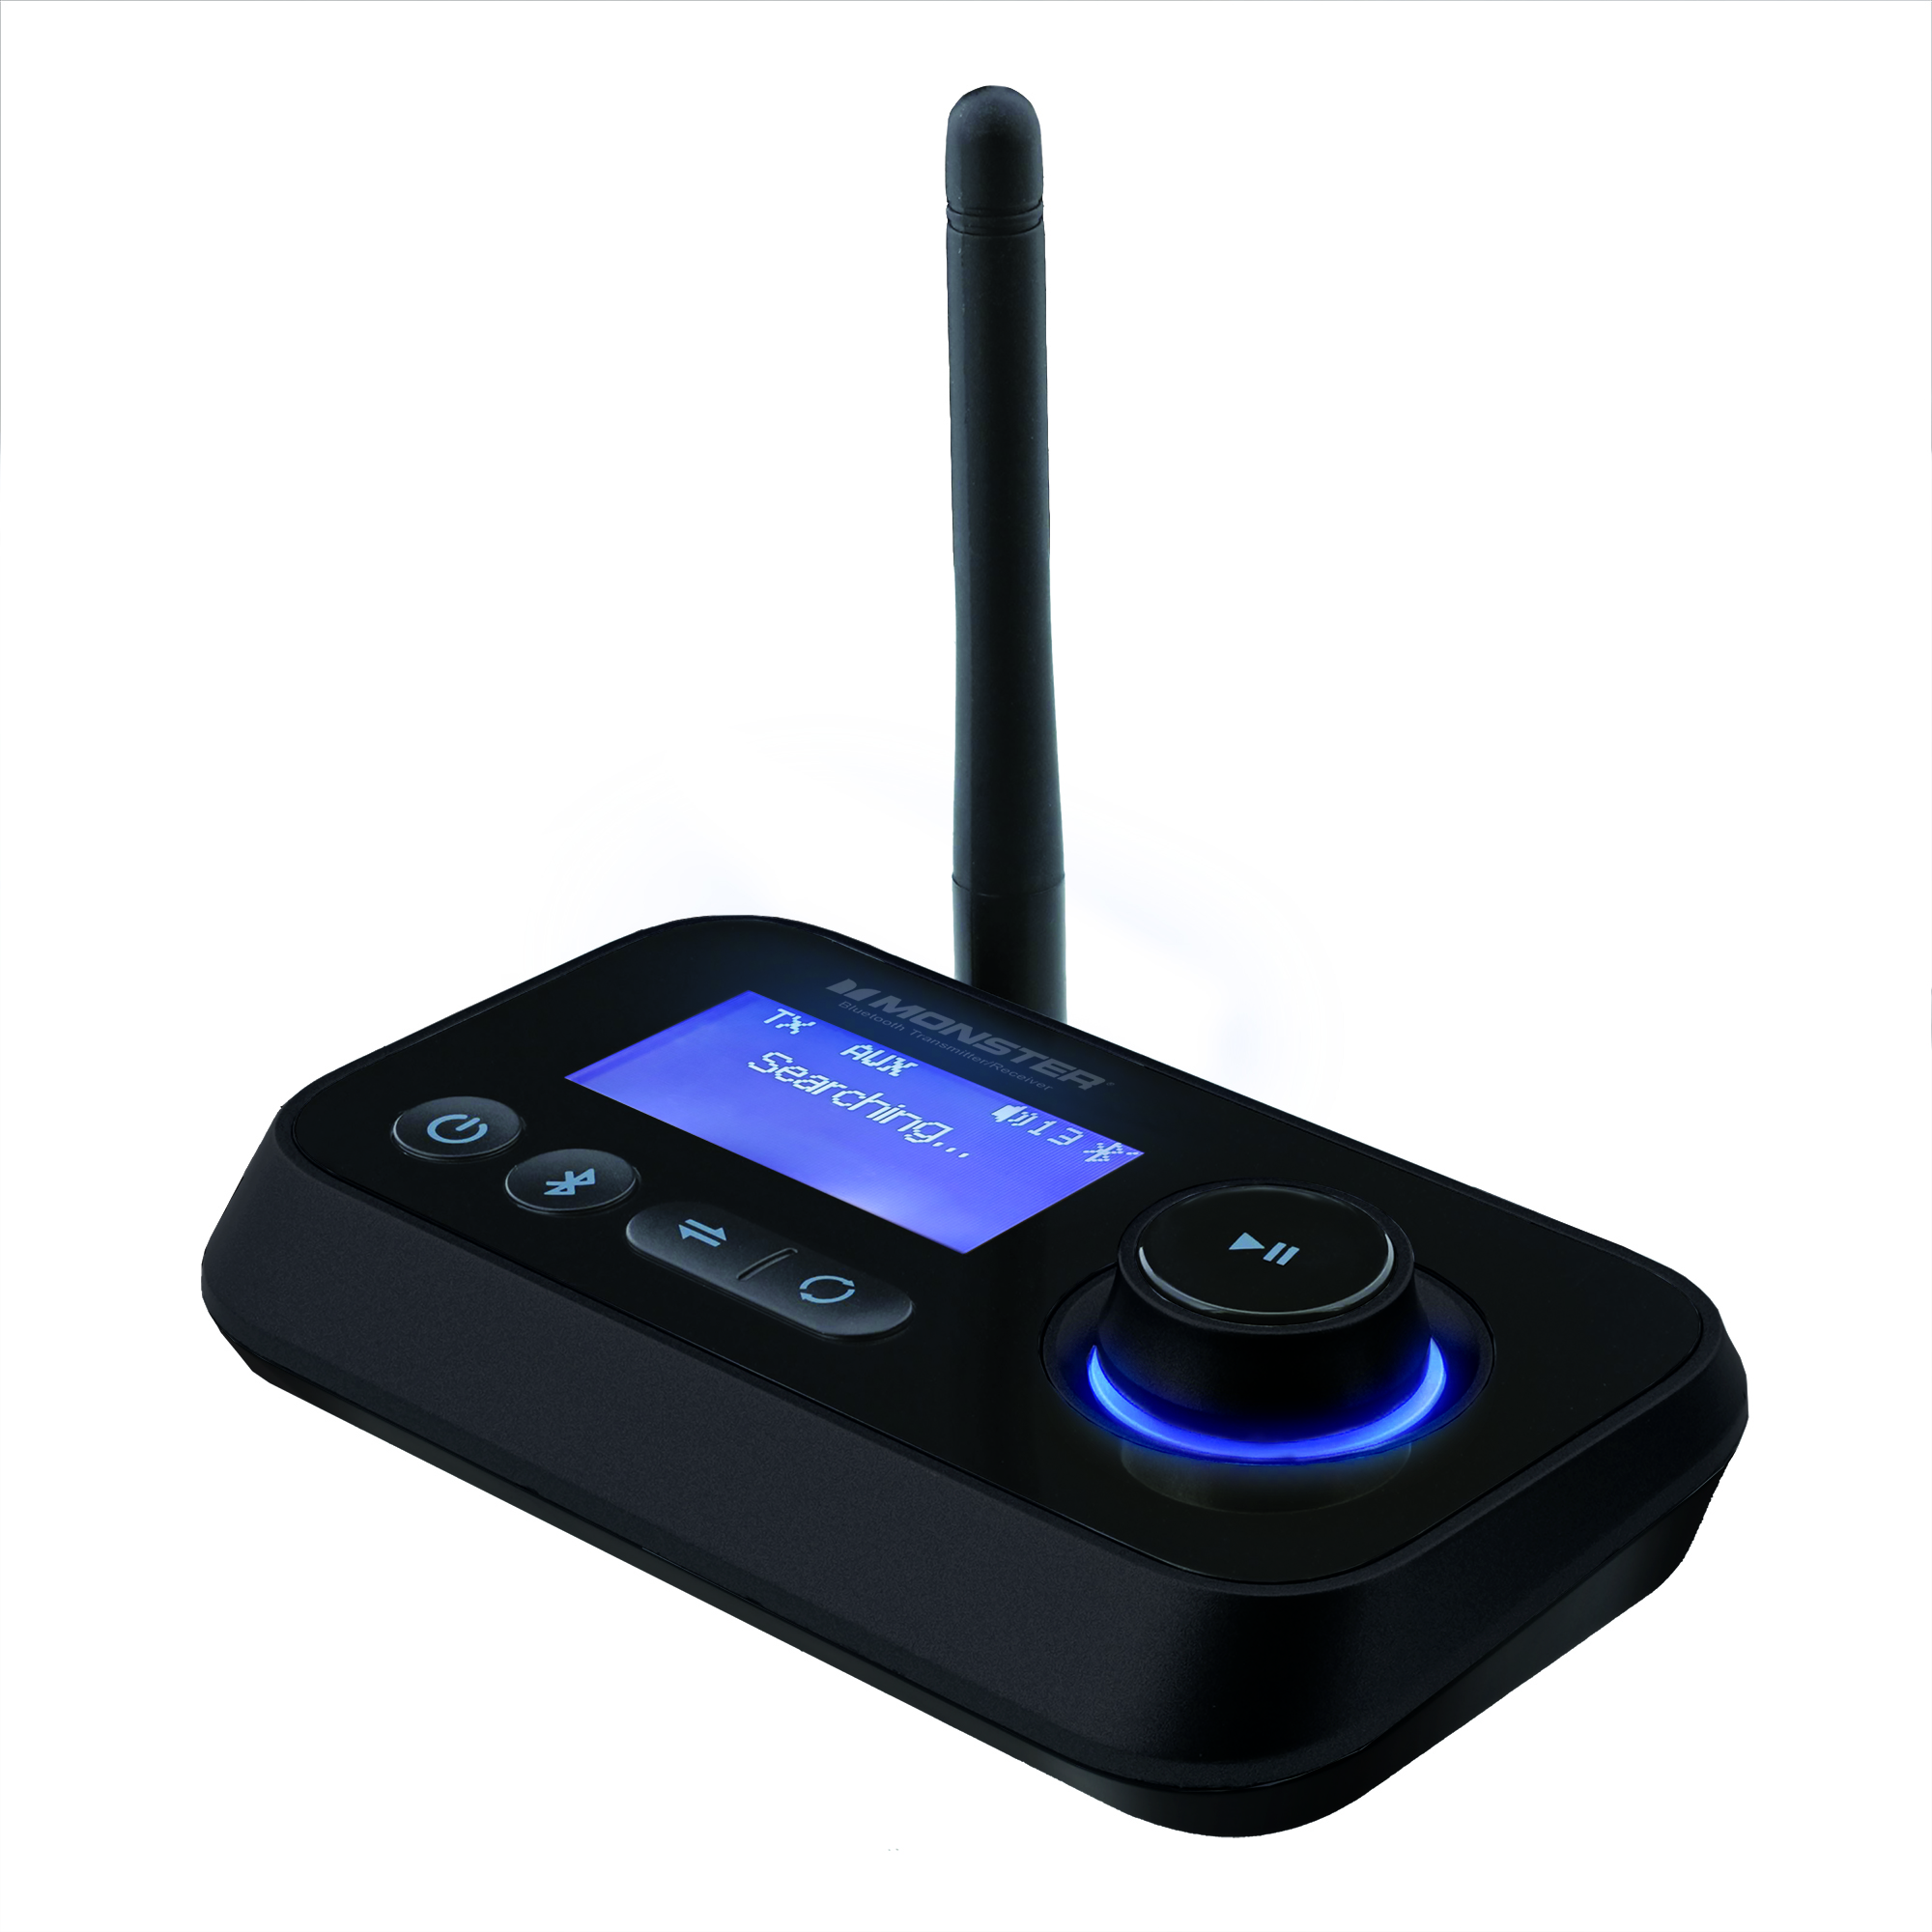 2 In 1 Bluetooth TV Transmitter Receiver, Make Non-Bluetooth Items  Bluetooth - Monster Illuminessence